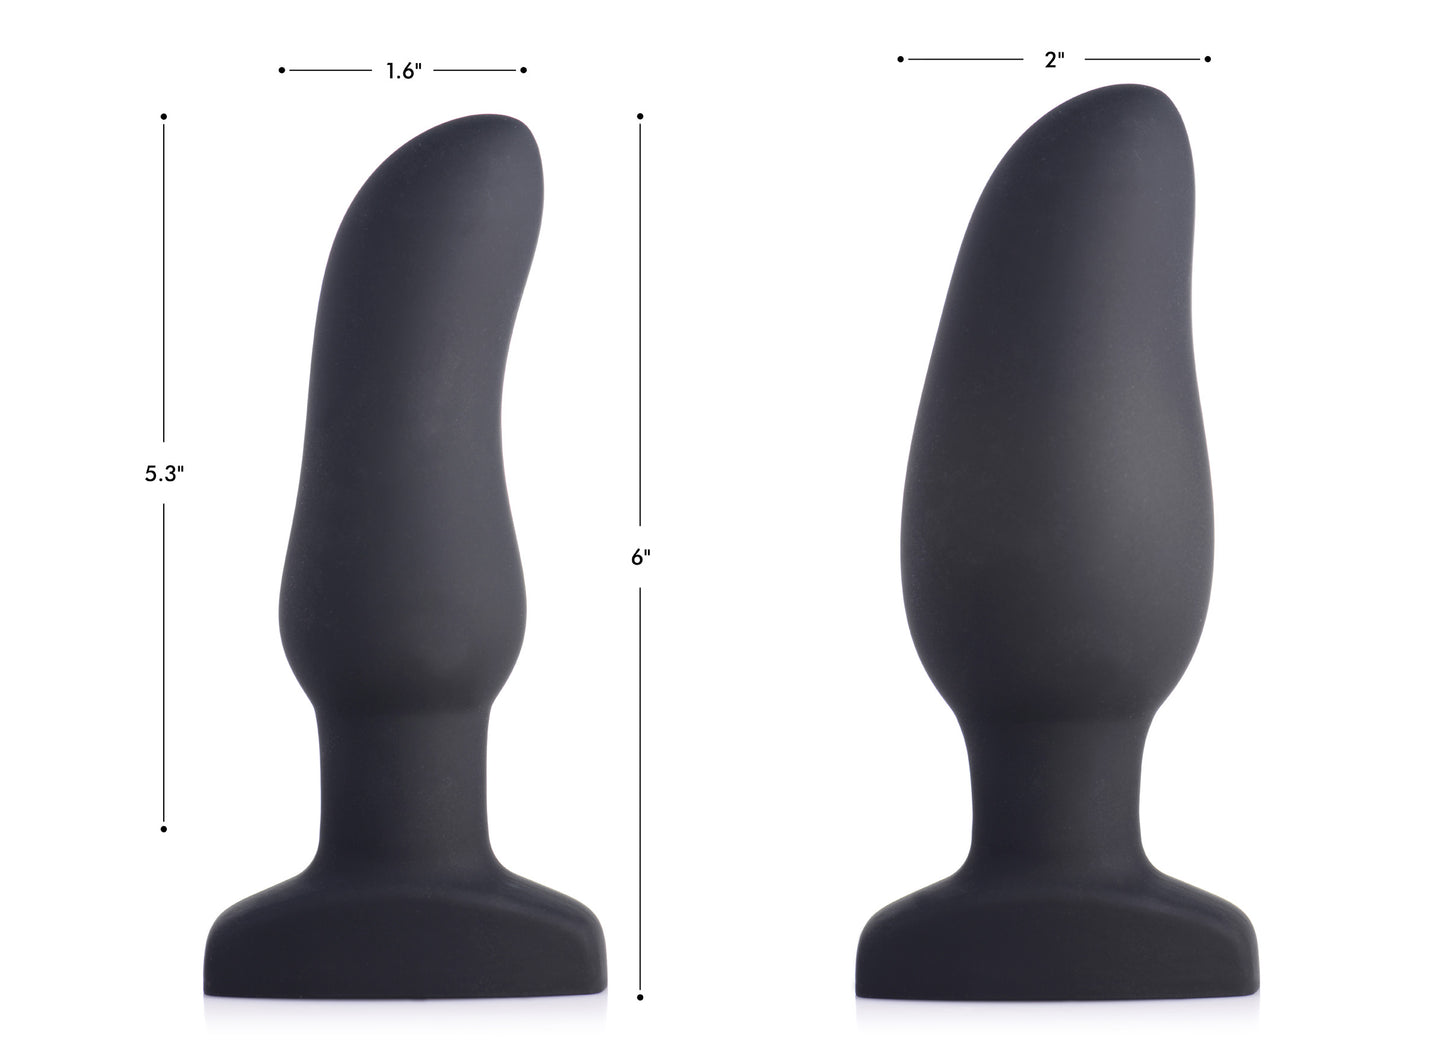 Worlds First Remote Control Inflatable 10X Vibrating Curved Silicone Anal Plug - UABDSM